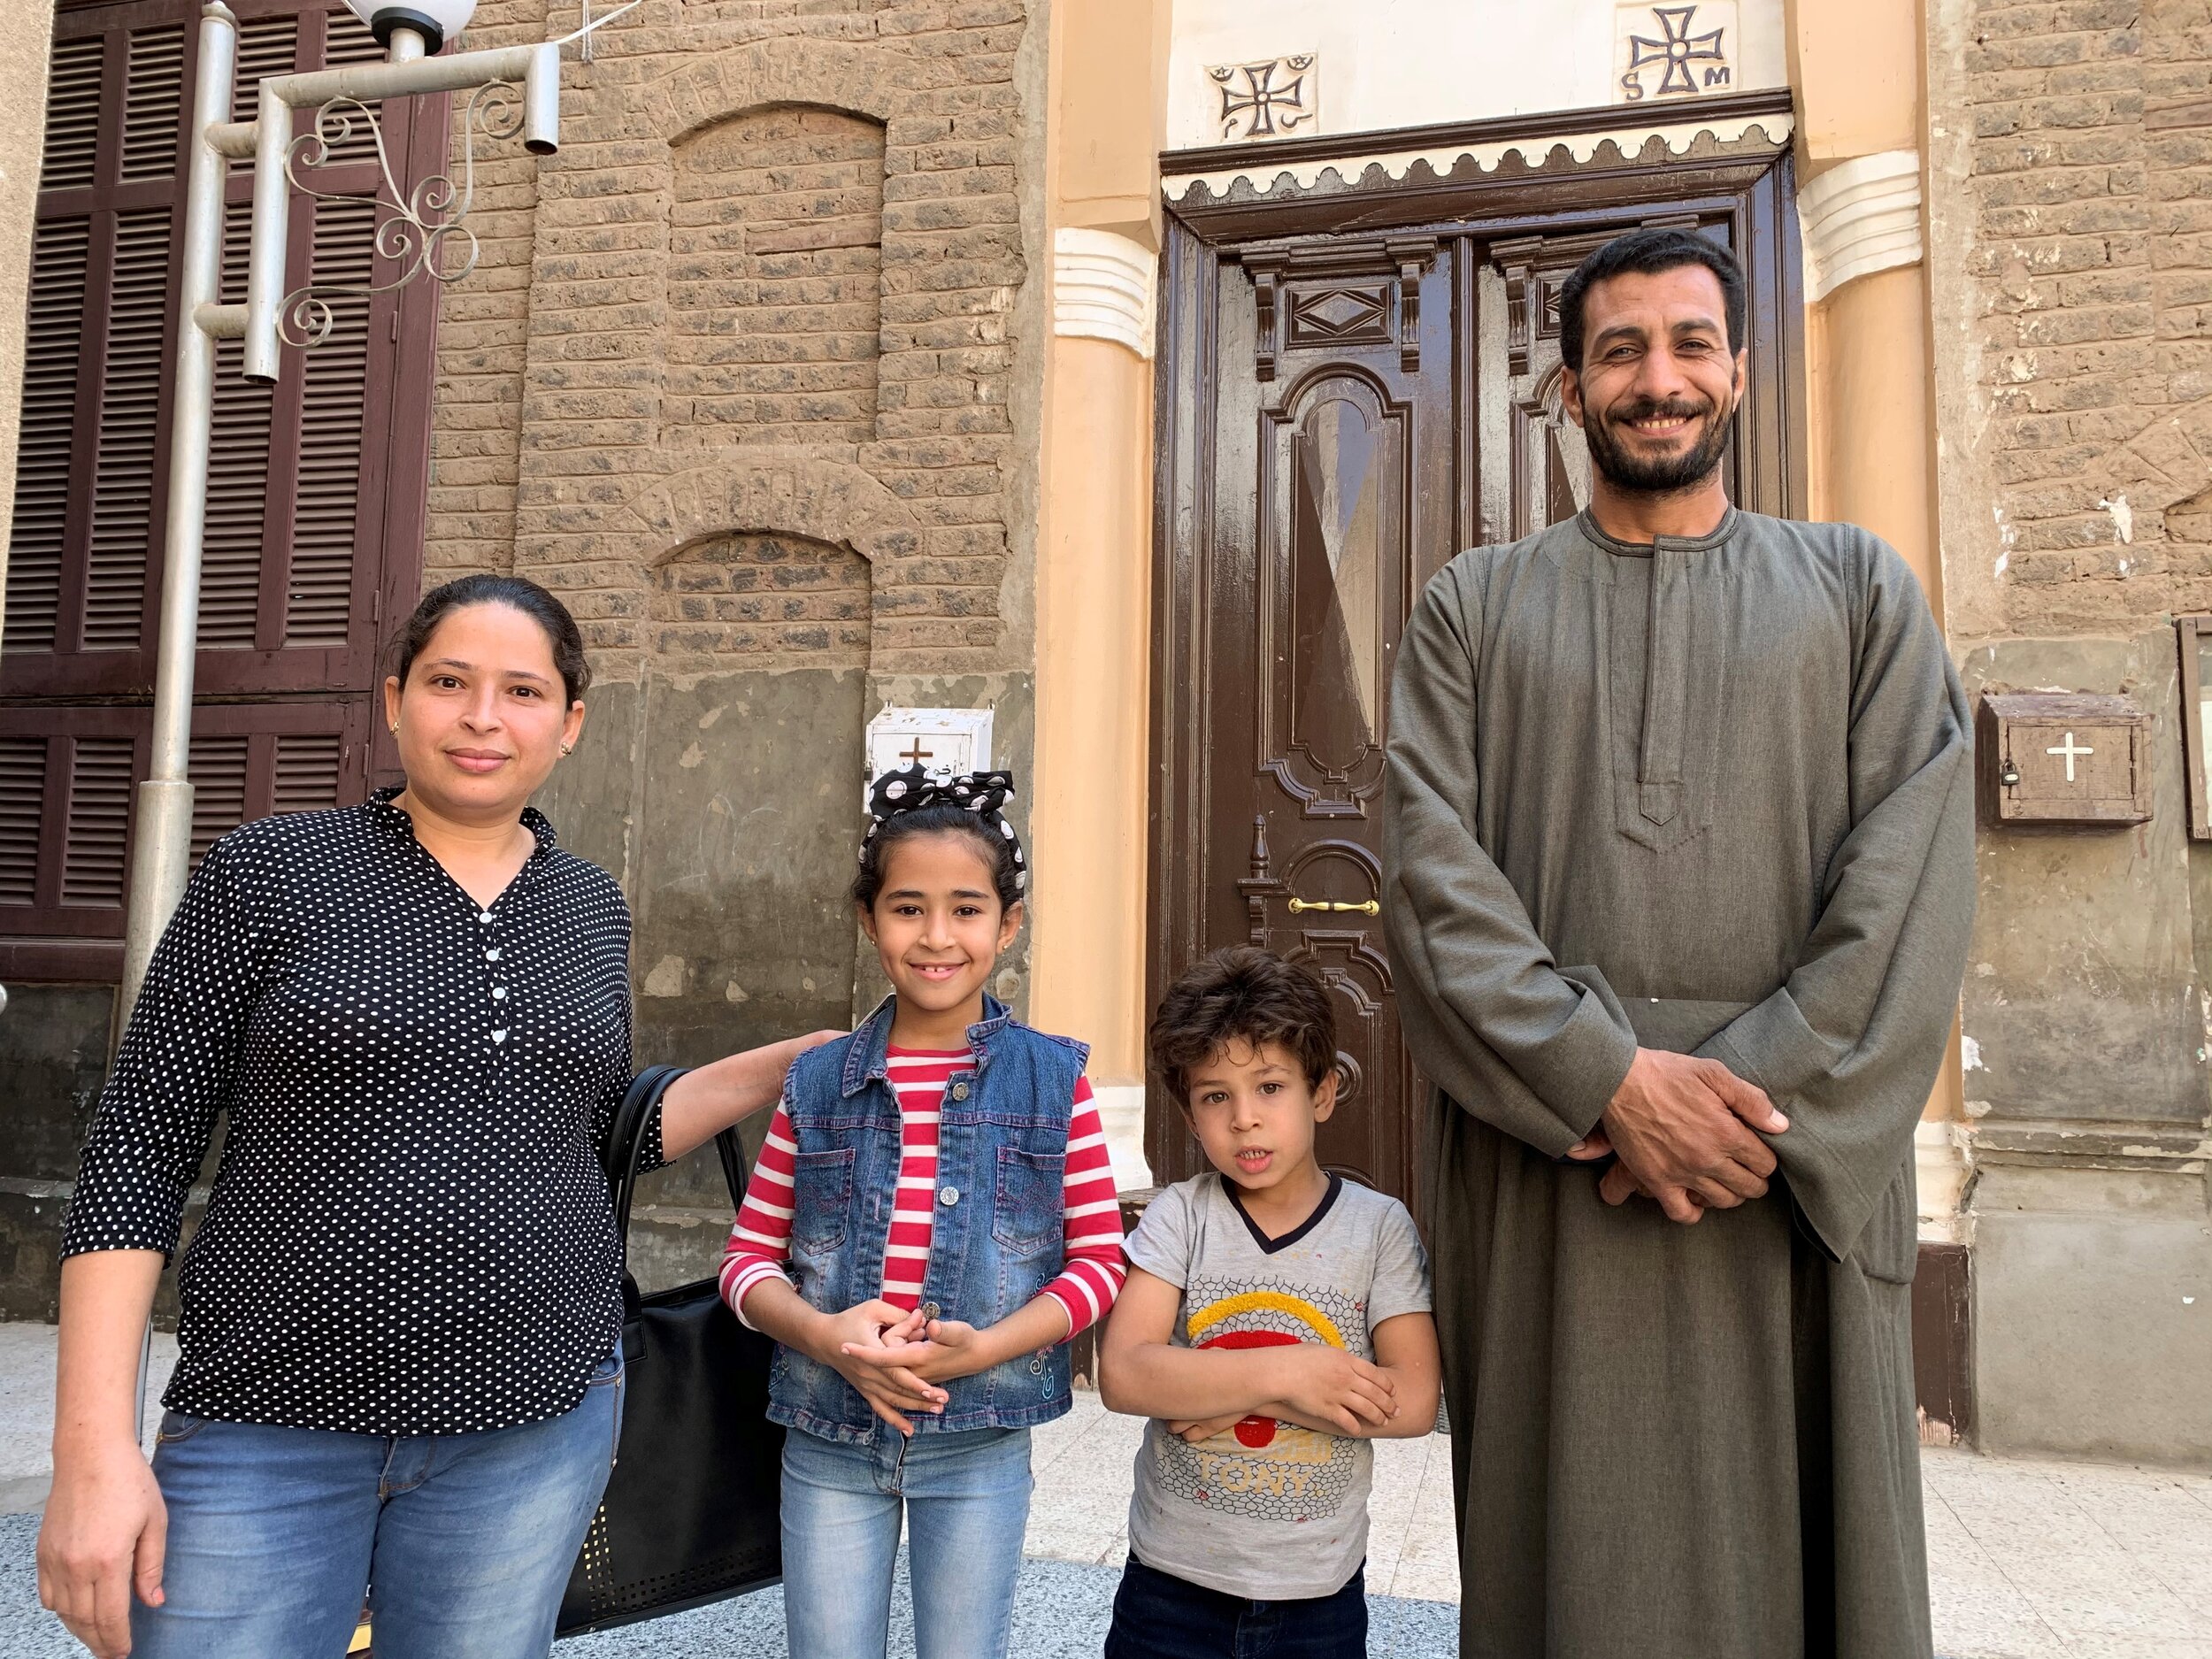  Joseph Tharwat (seen here with his family), is active in promoting good relations between Christians and Muslims in the city 